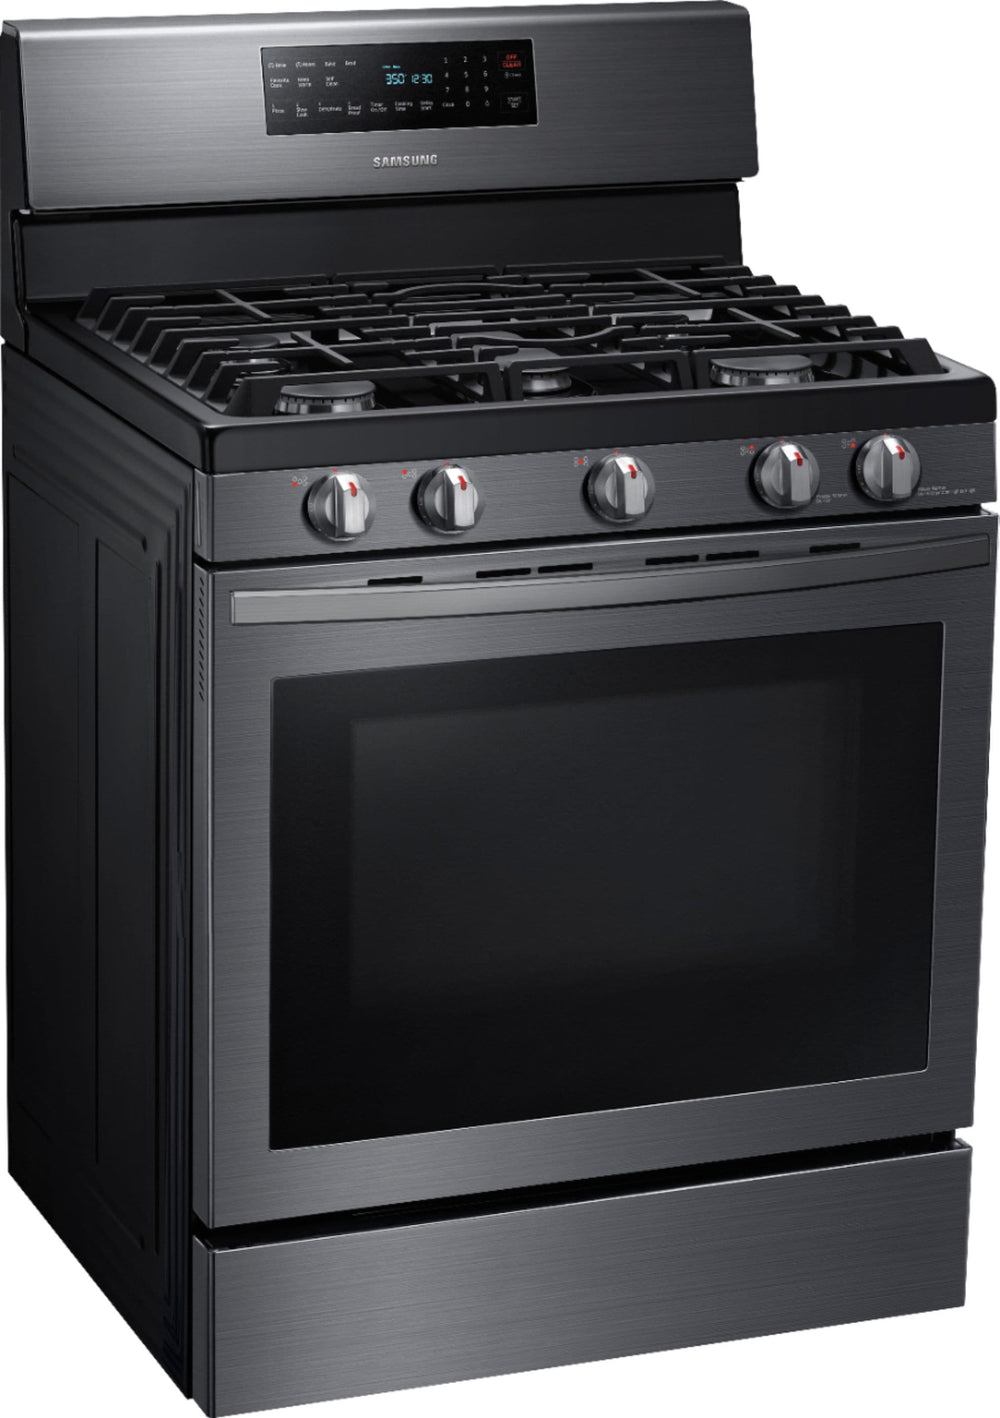 Samsung - 5.8 Cu. Ft. Freestanding Gas Convection Range with Self-High Heat Cleaning - Black stainless steel_1